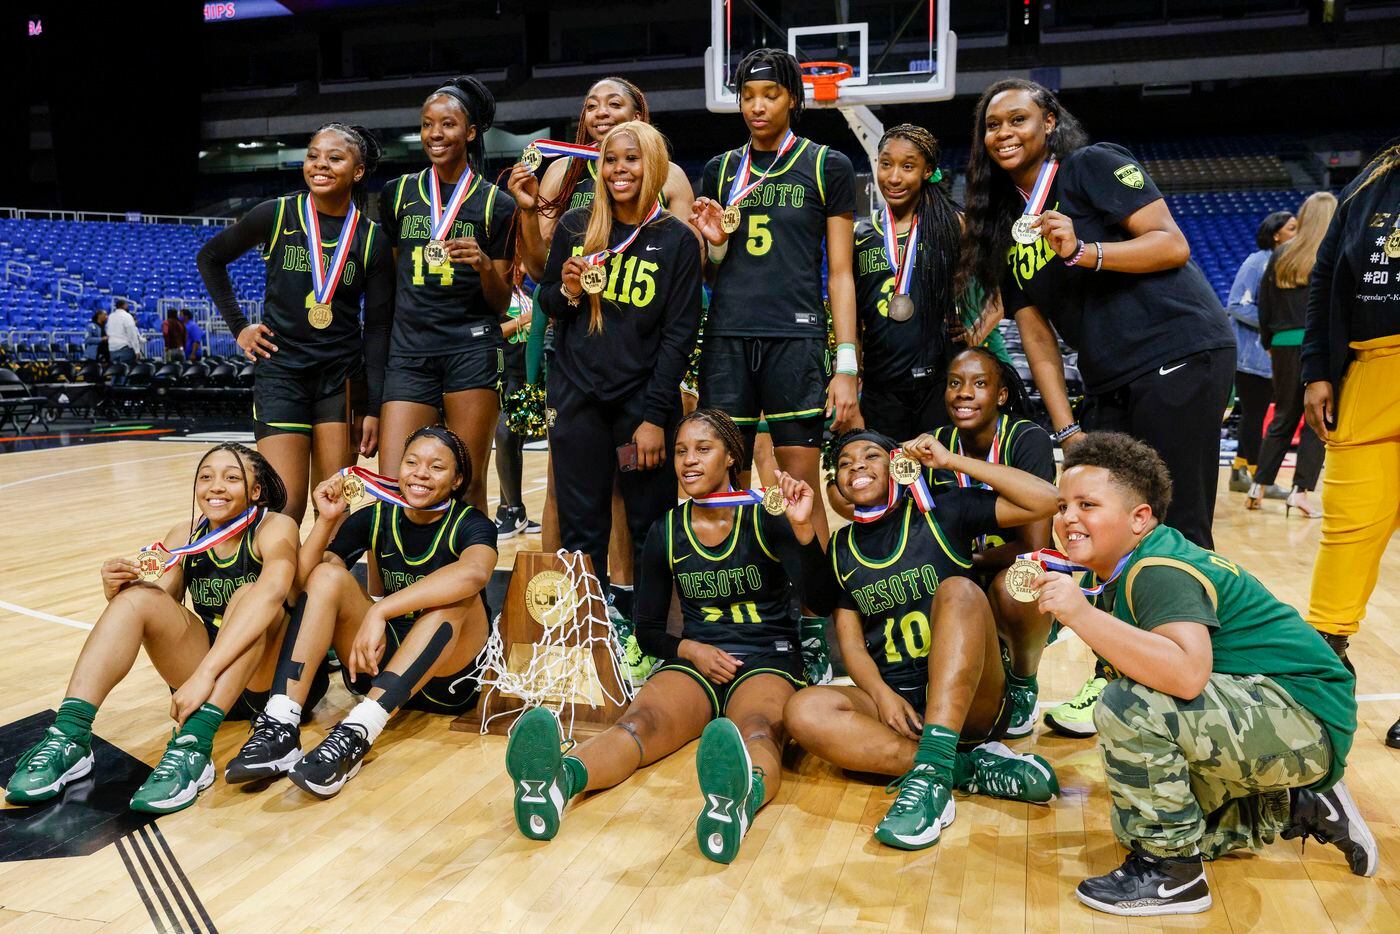 The DeSoto team poses with the Class 6A state championship trophy after defeating South...